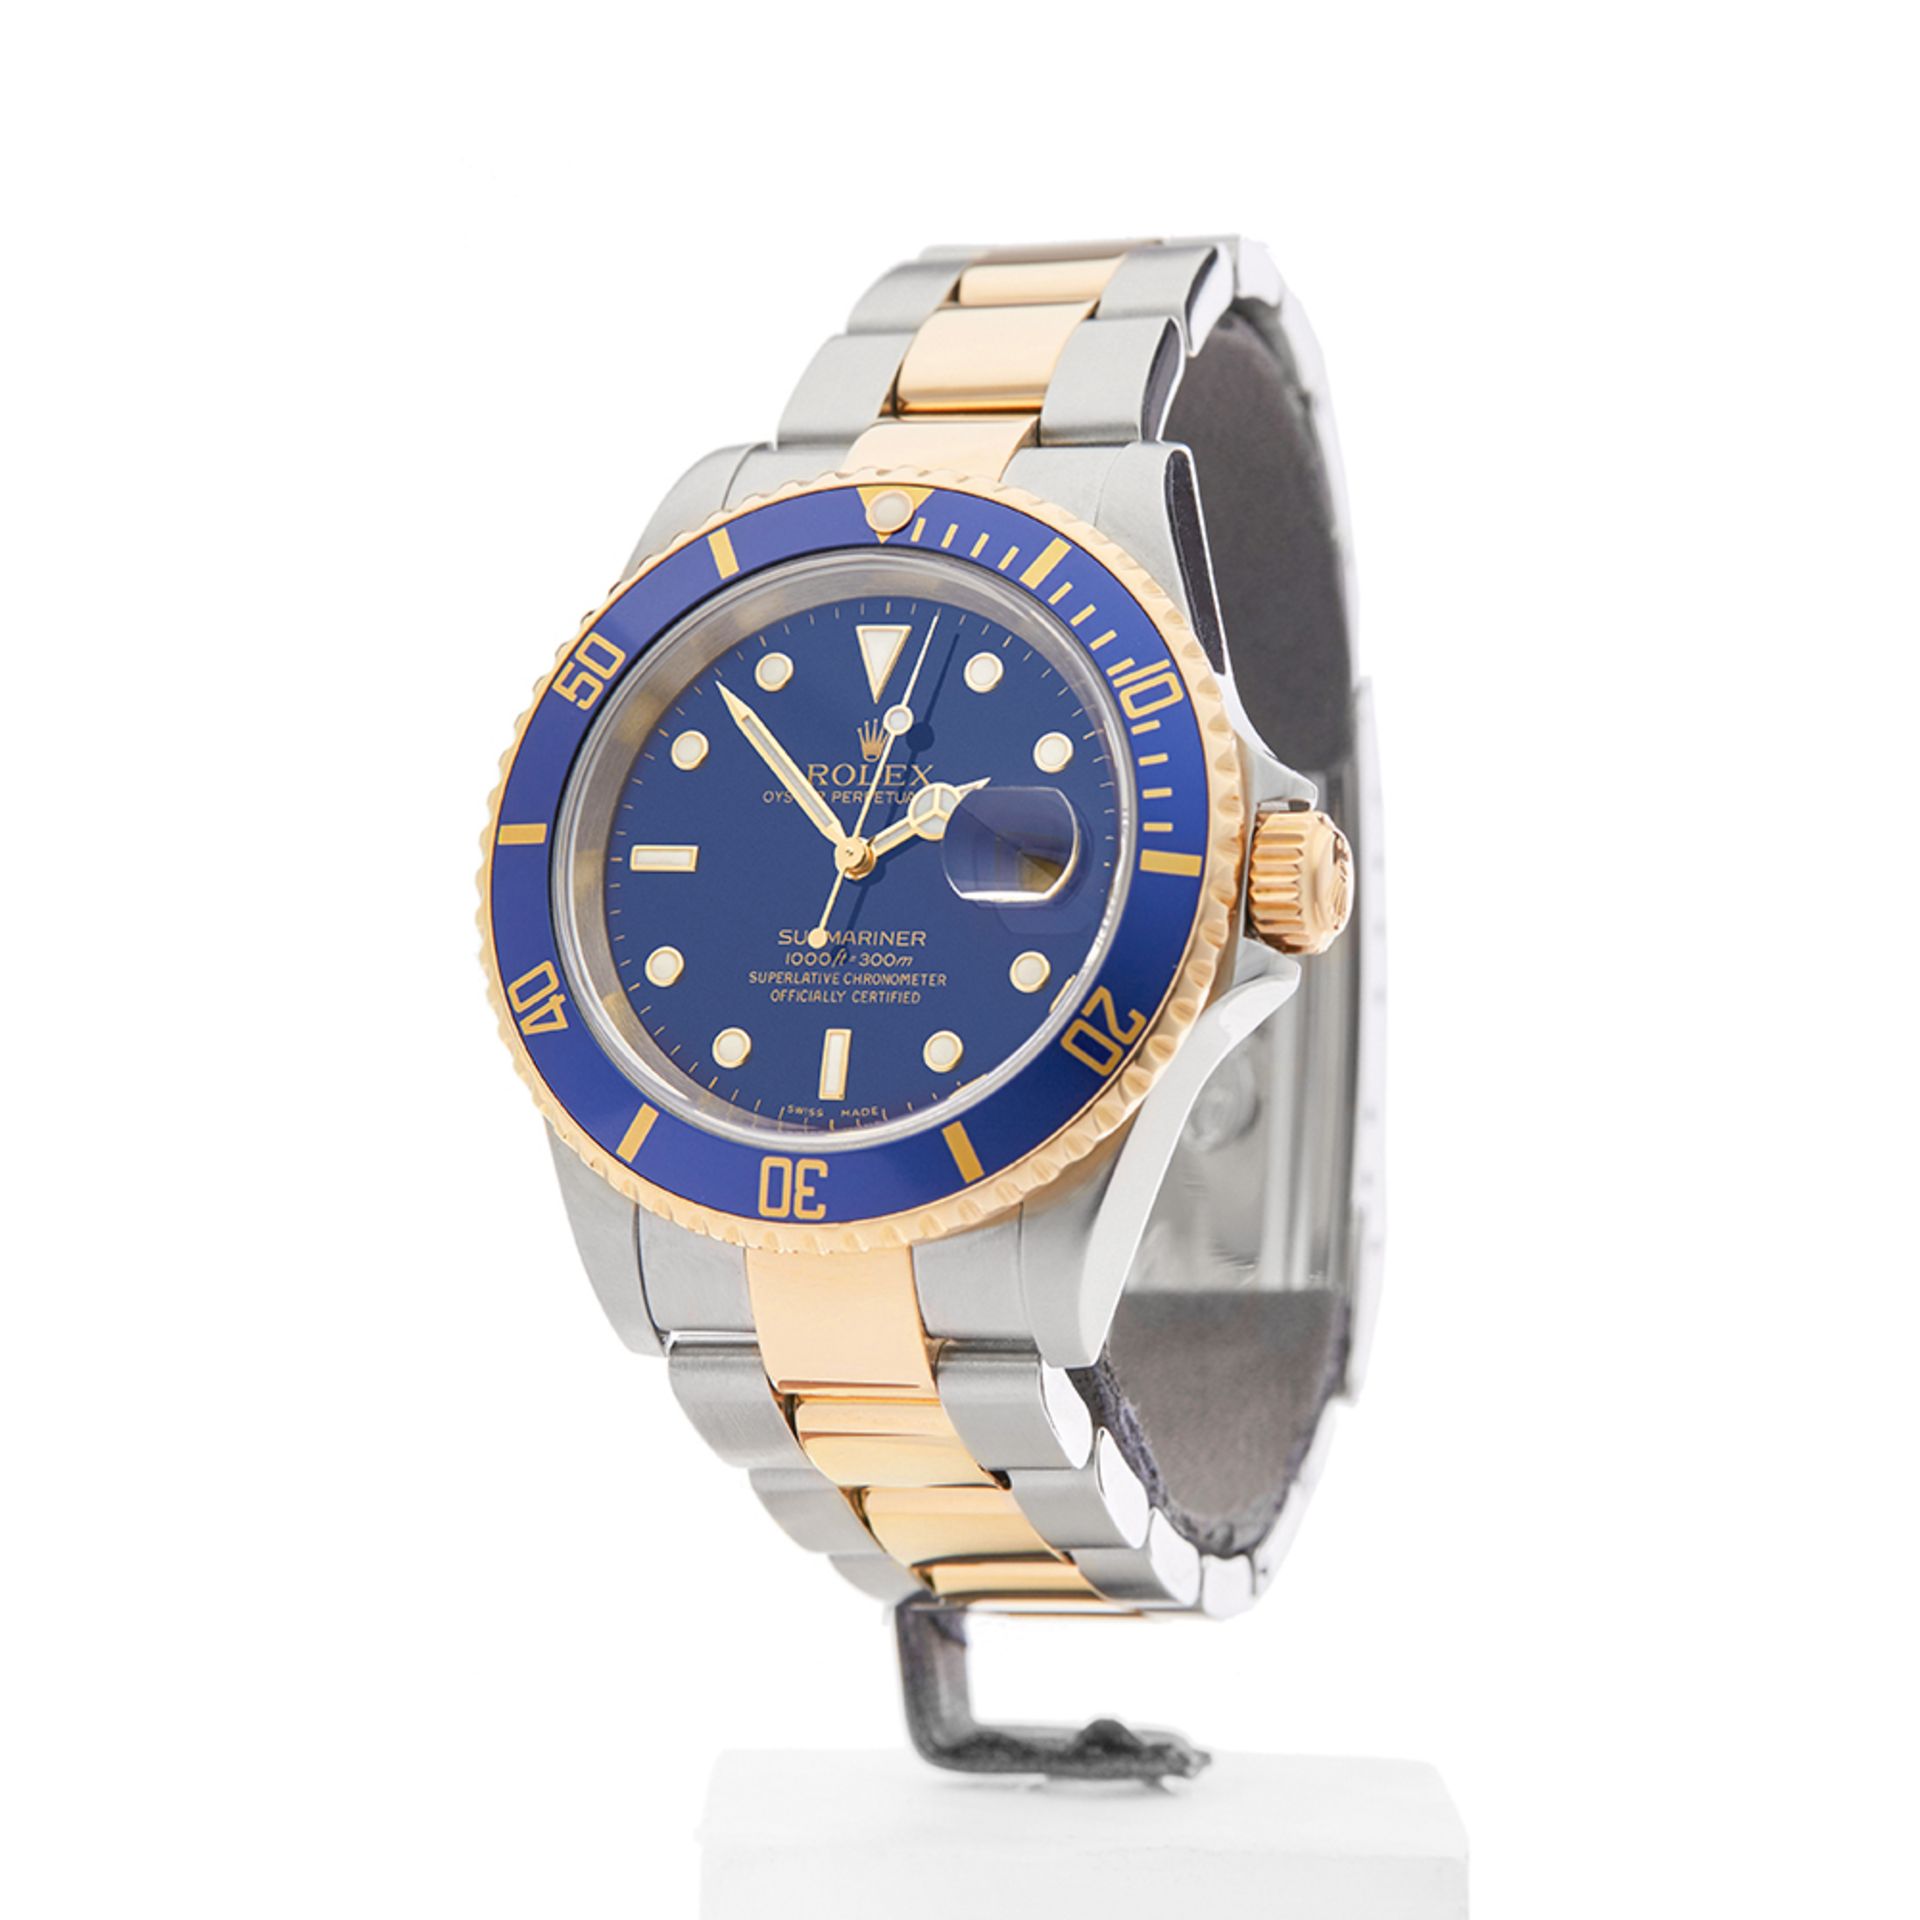 Submariner 40mm Stainless Steel & 18k Yellow Gold 16613 - Image 3 of 9